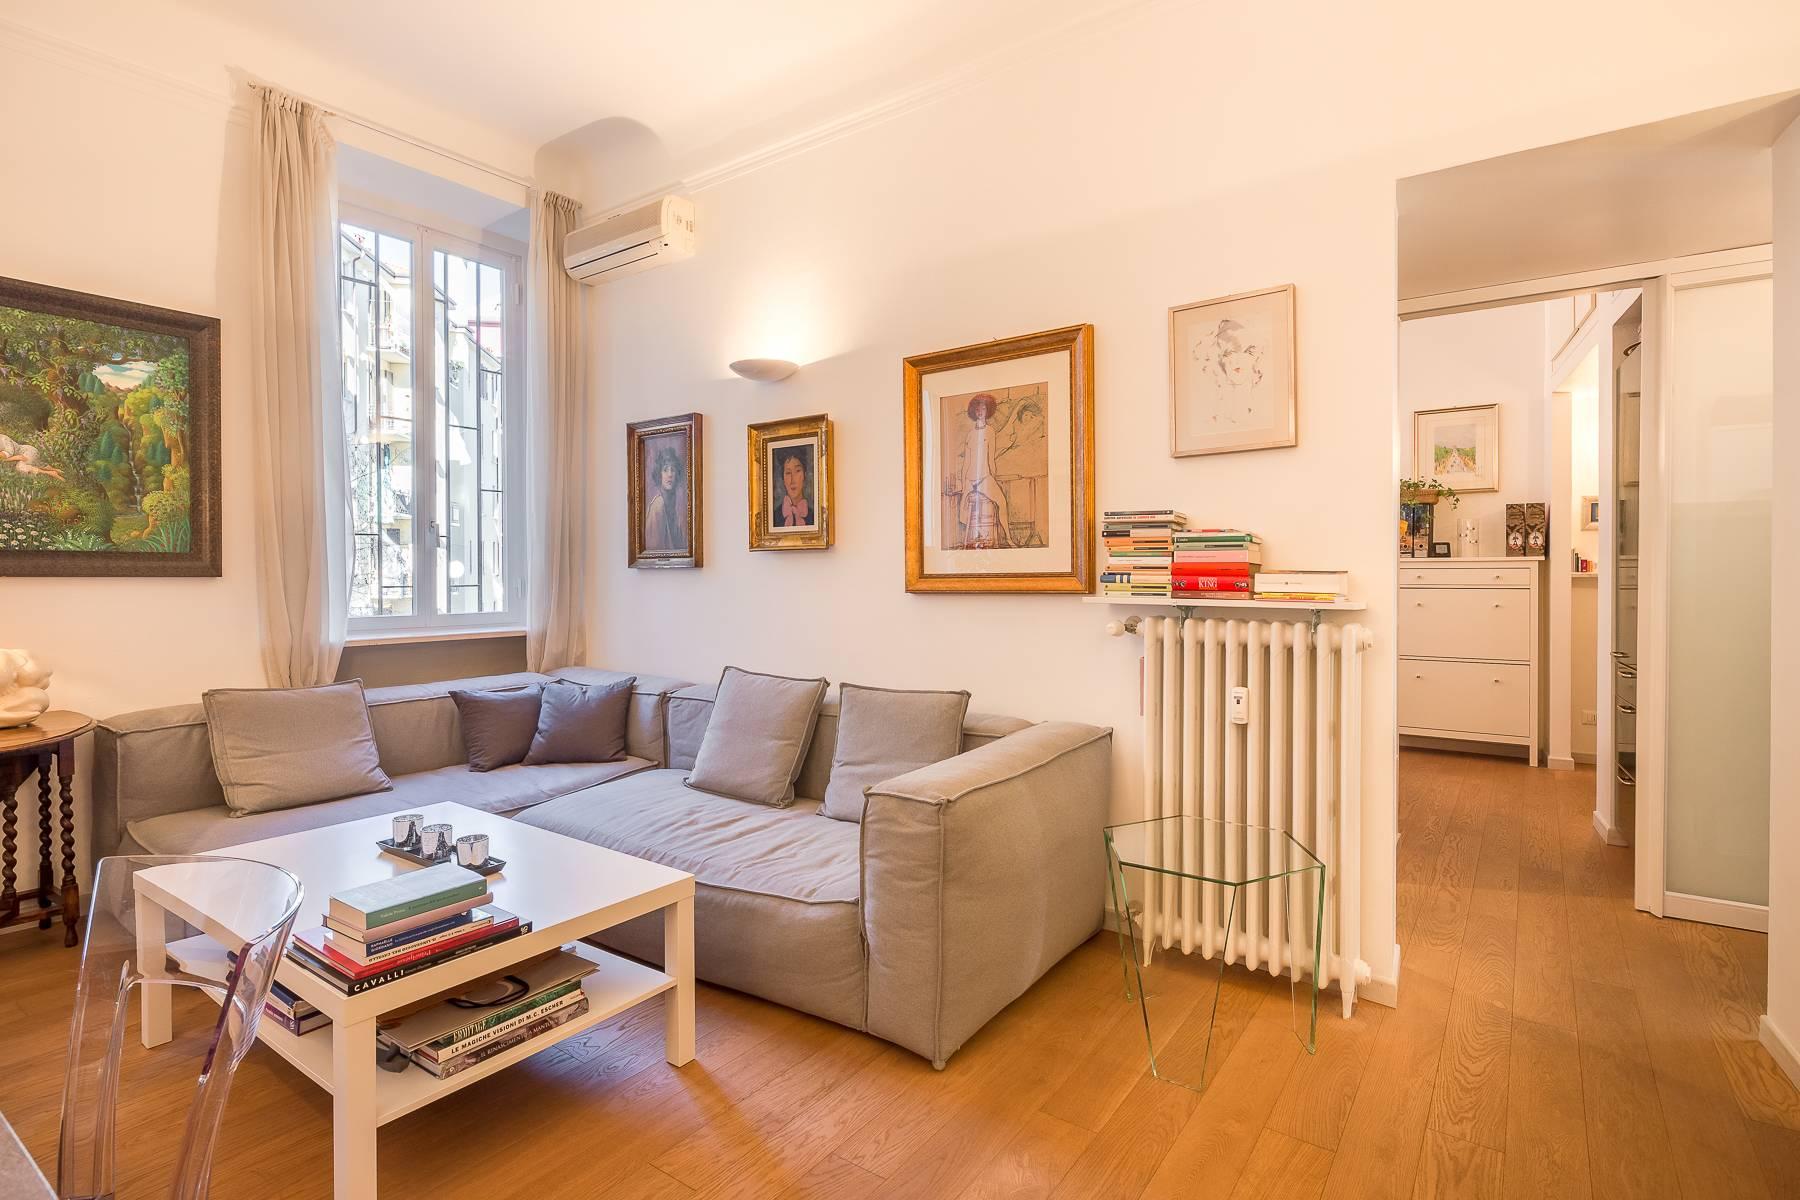 Beautiful renovated apartment in a period building - 15